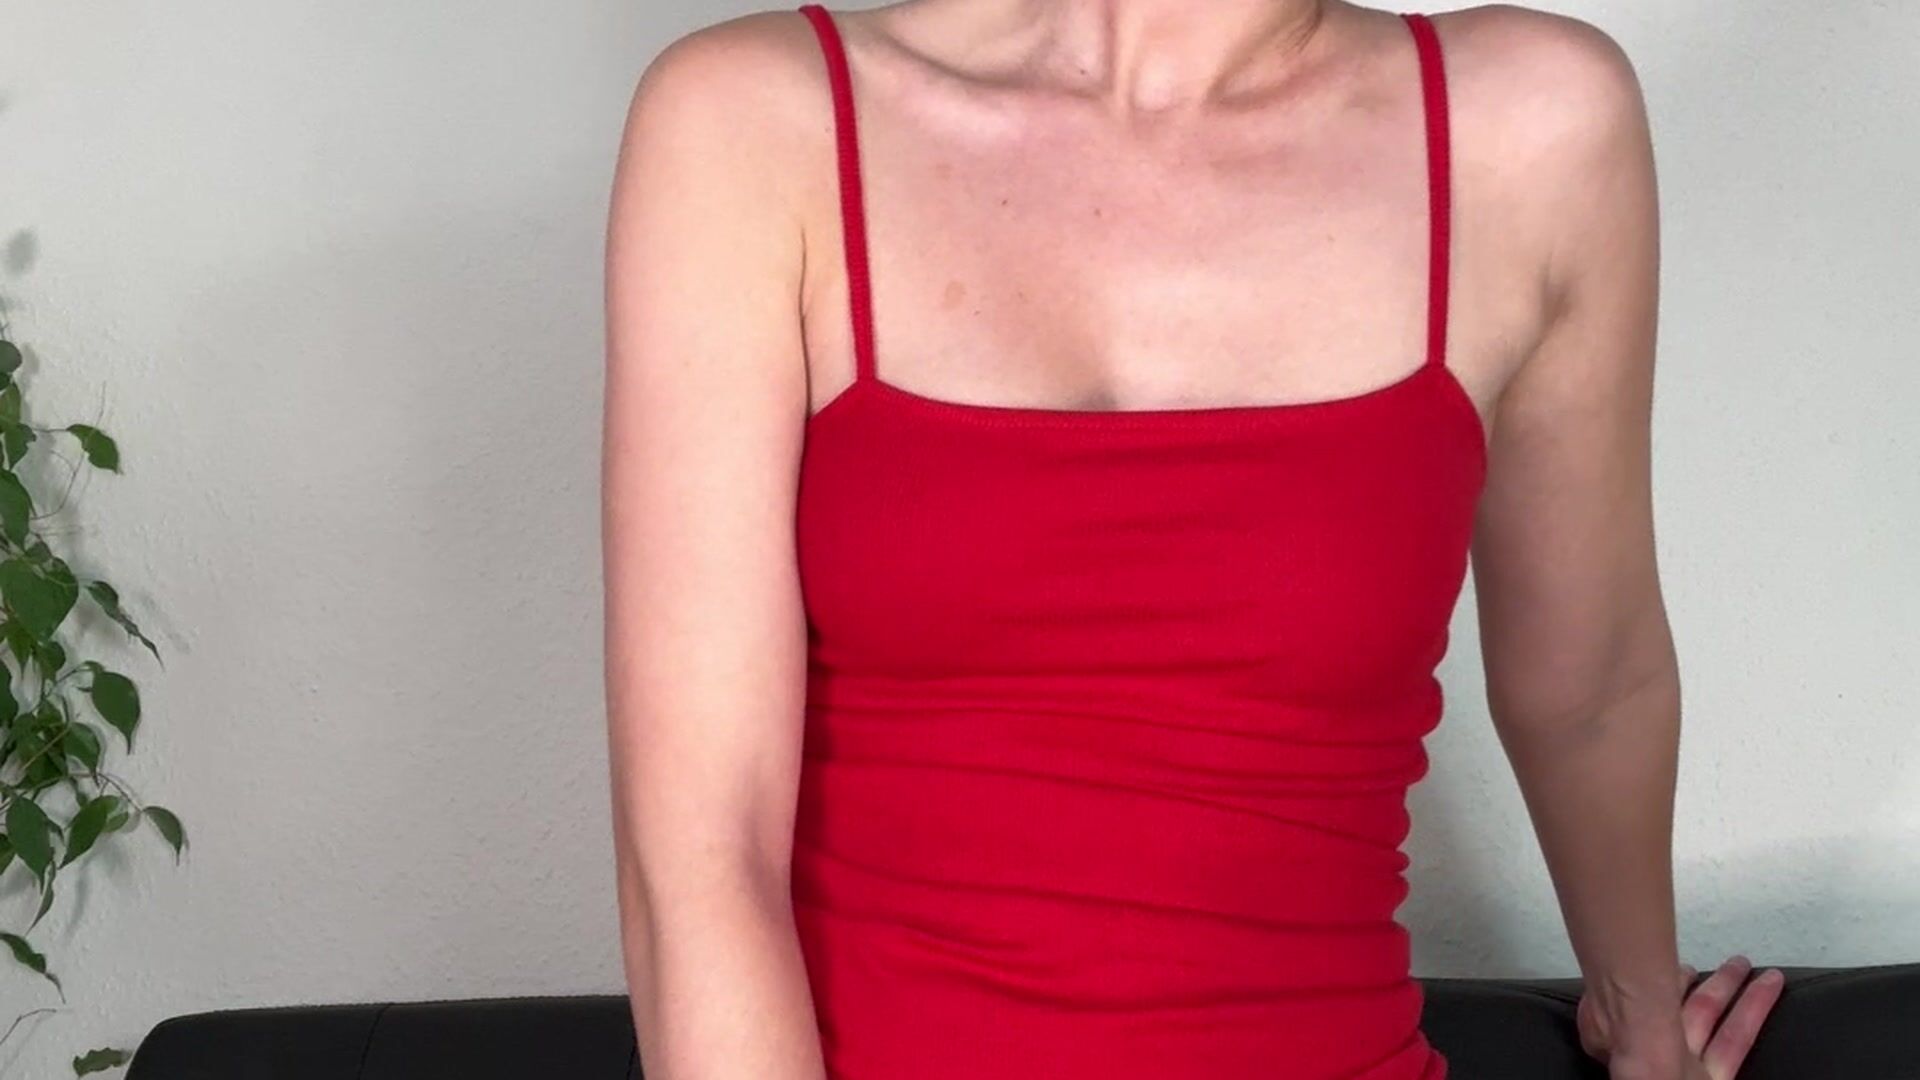 Riding Dildo in my red Dress